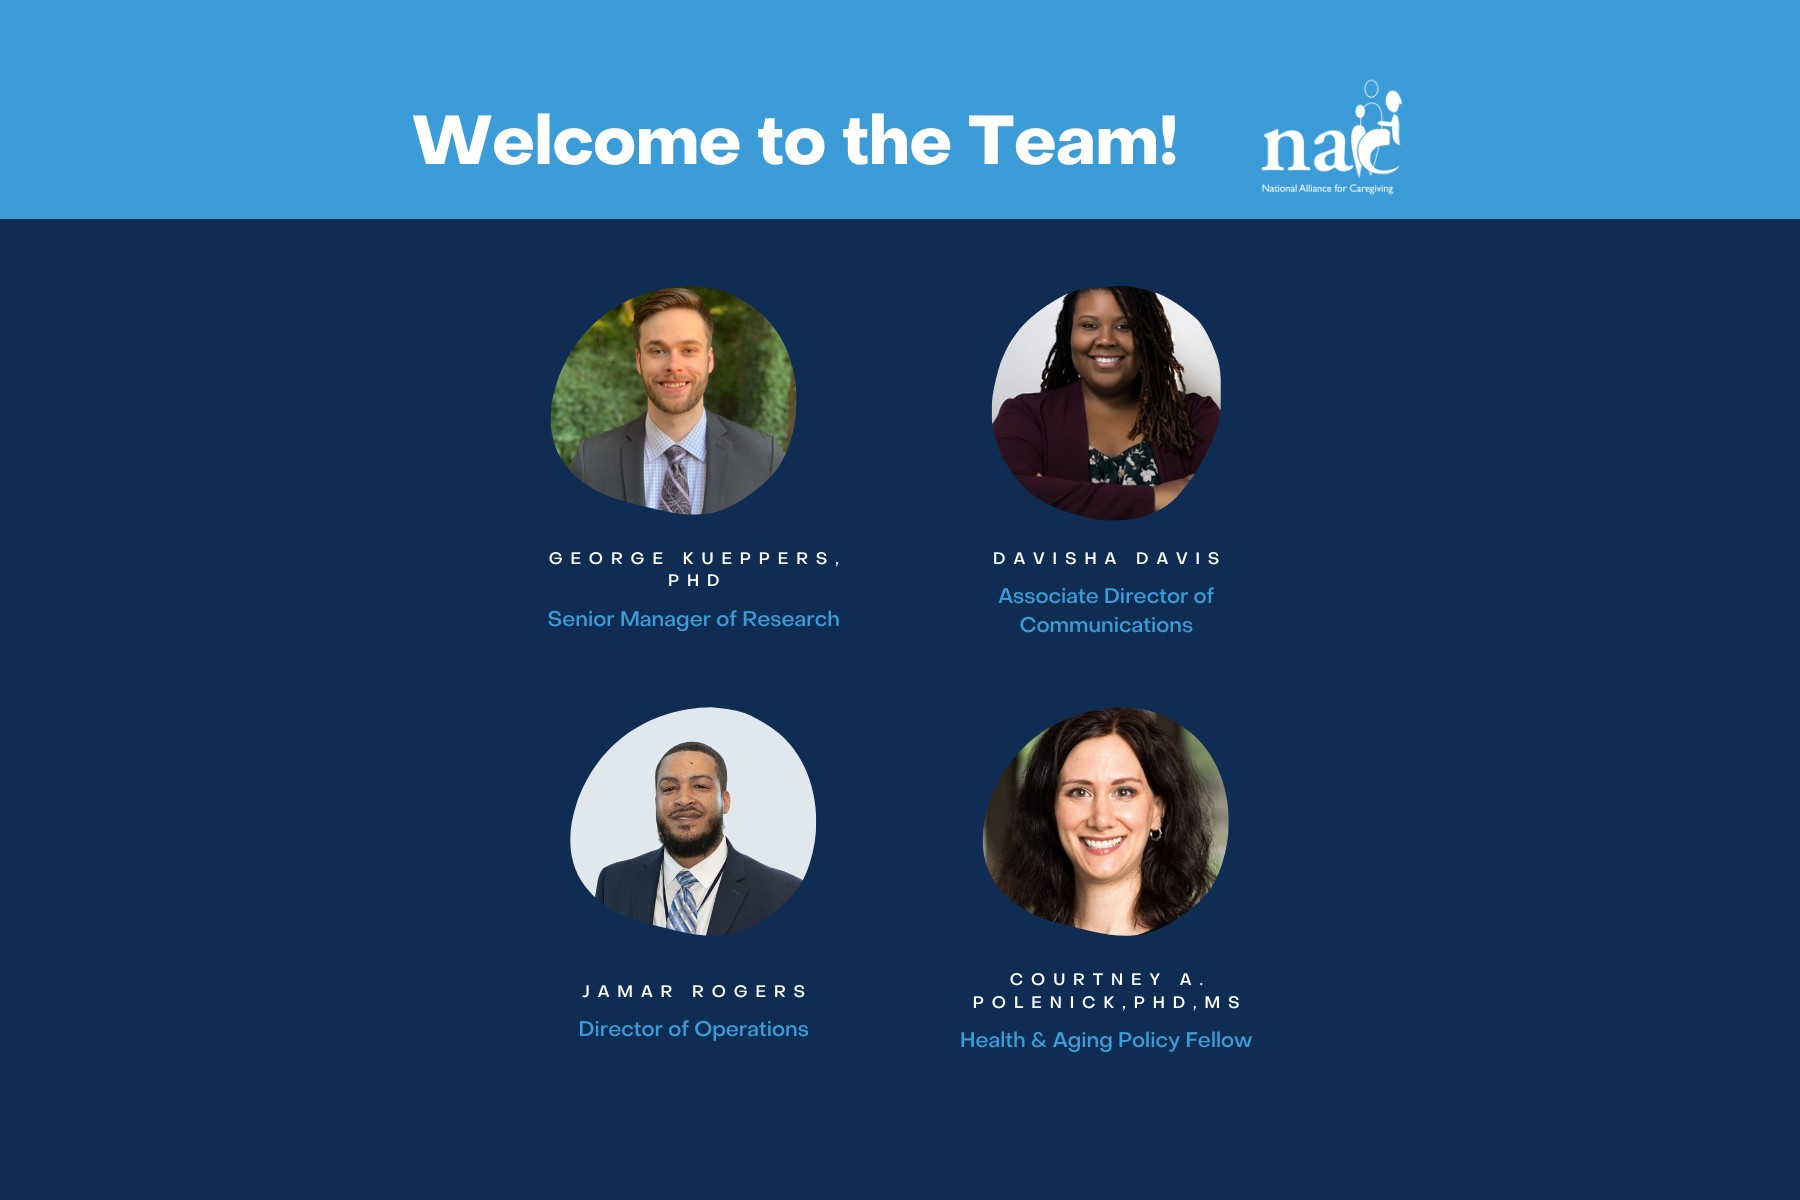 The National Alliance for Caregiving Bolsters Team with Strategic Hires and Promotion